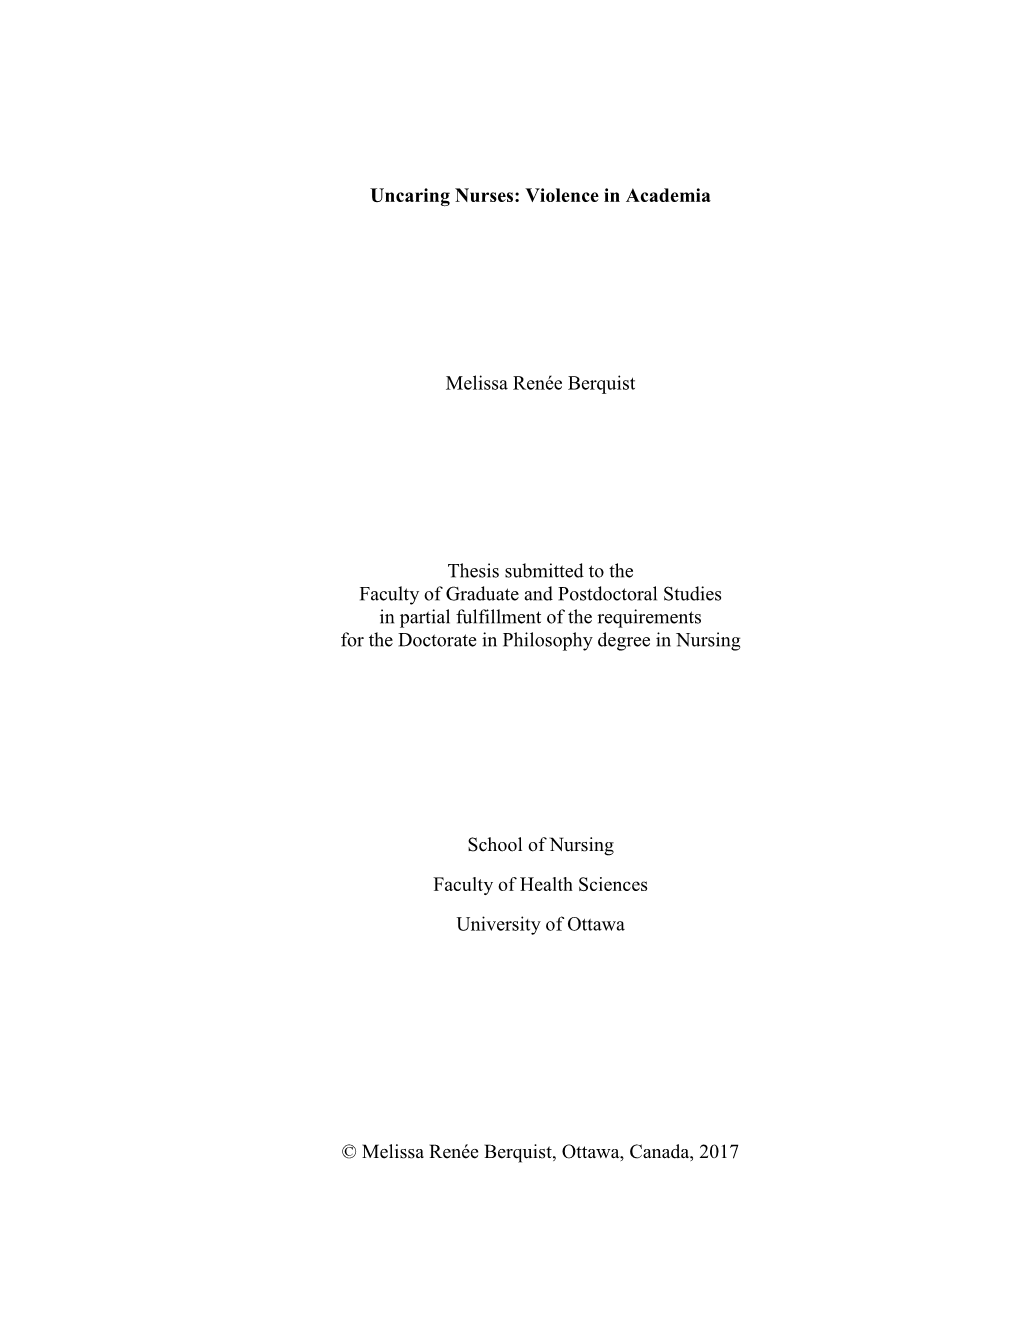 Violence in Academia Melissa Renée Berquist Thesis Submitted to The